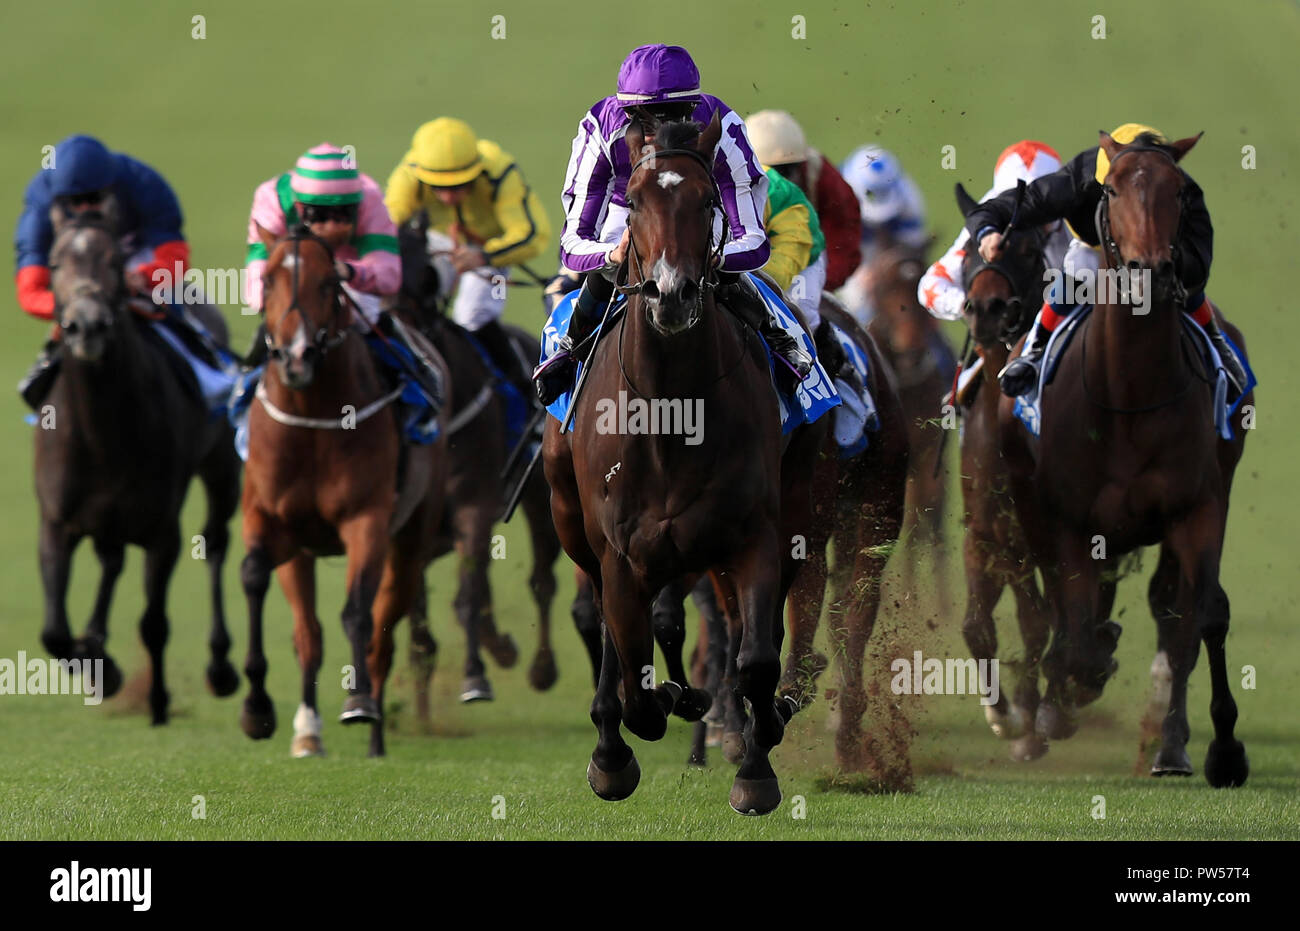 Sergei Prokofiev (centre) ridden by Donnacha O'Brien wins The Newmarket Academy Godolphin Beacon Project Cornwalls Stakes during day one of the Dubai Future Champions Festival at Newmarket Racecourse. PRESS ASSOCIATION Photo. Picture date: Friday October 12, 2018. See PA story RACING Newmarket. Photo credit should read: Simon Cooper/PA Wire Stock Photo